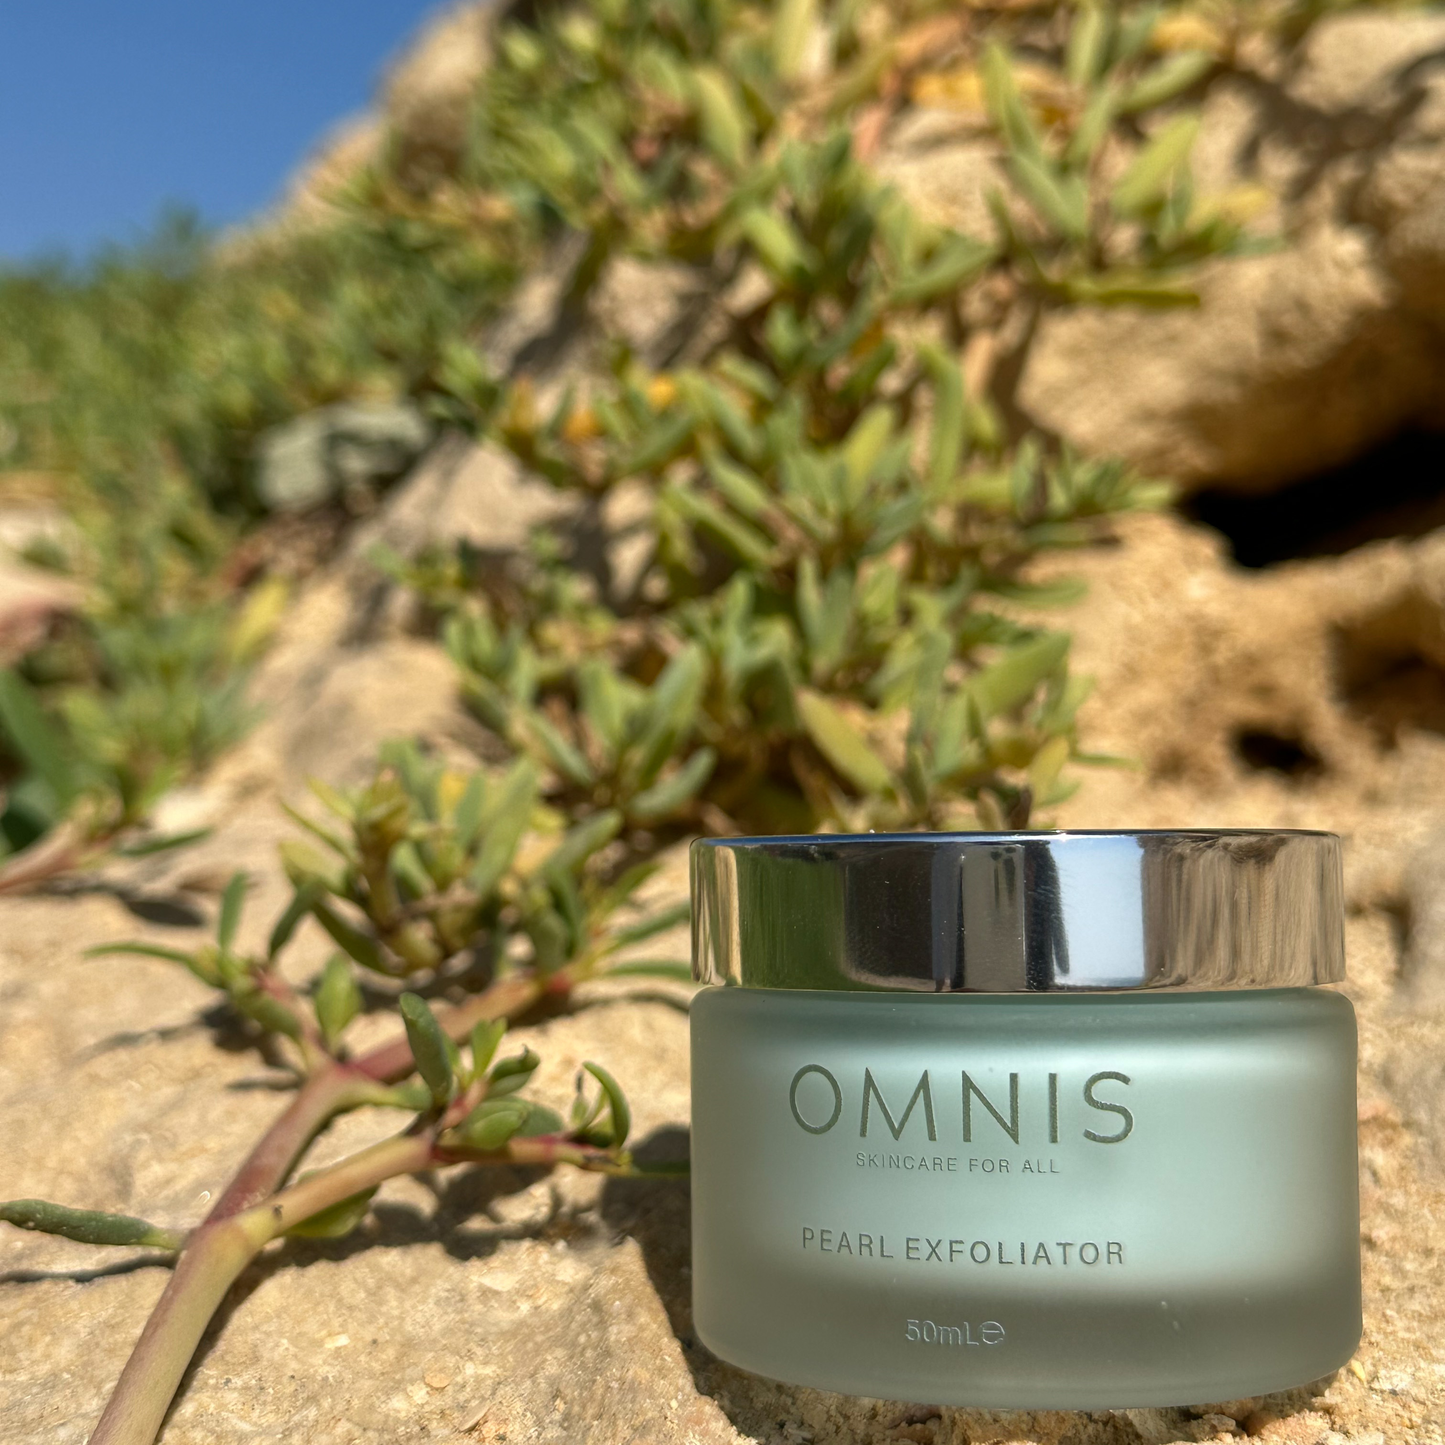 Photo of the Omnis Pearl Exfoliator jar sitting on a pale yellow rock next to the greenery growing out of it 